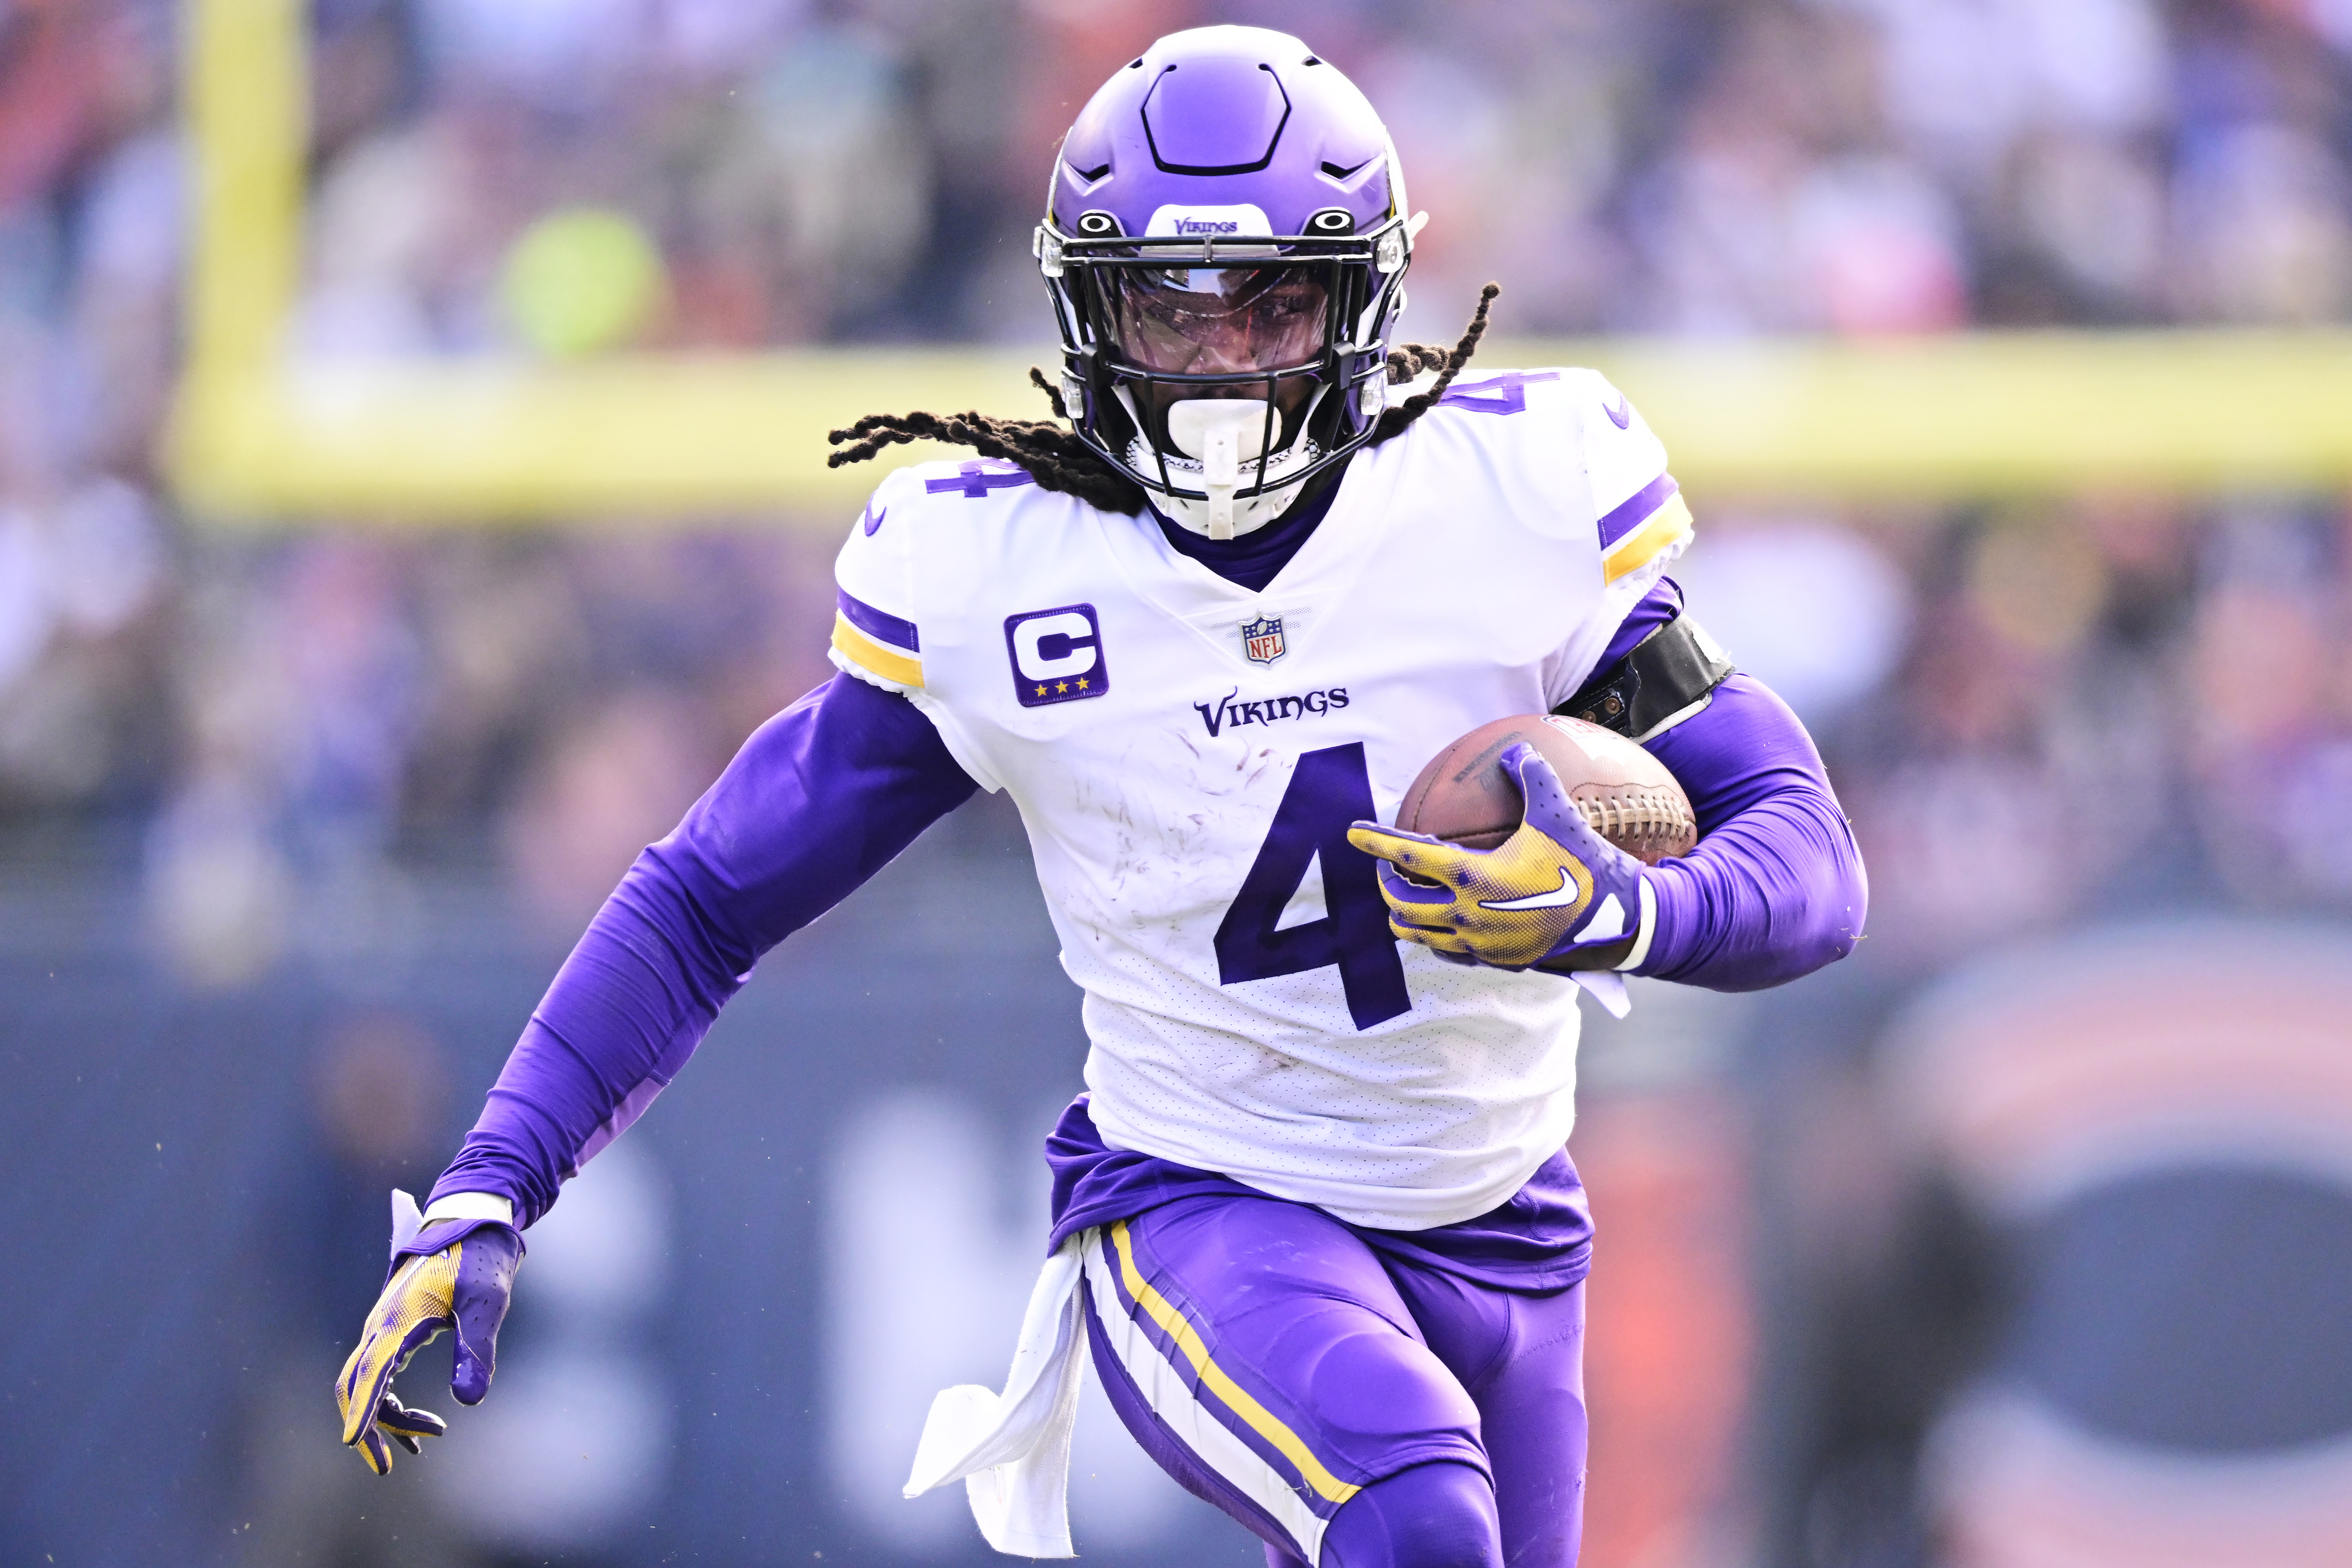 Running back Dalvin Cook of the Minnesota Vikings carries the ball in the game against the Chicago Bears at Soldier Field in Chicago, Illinois, January 8, 2023. /CFP 